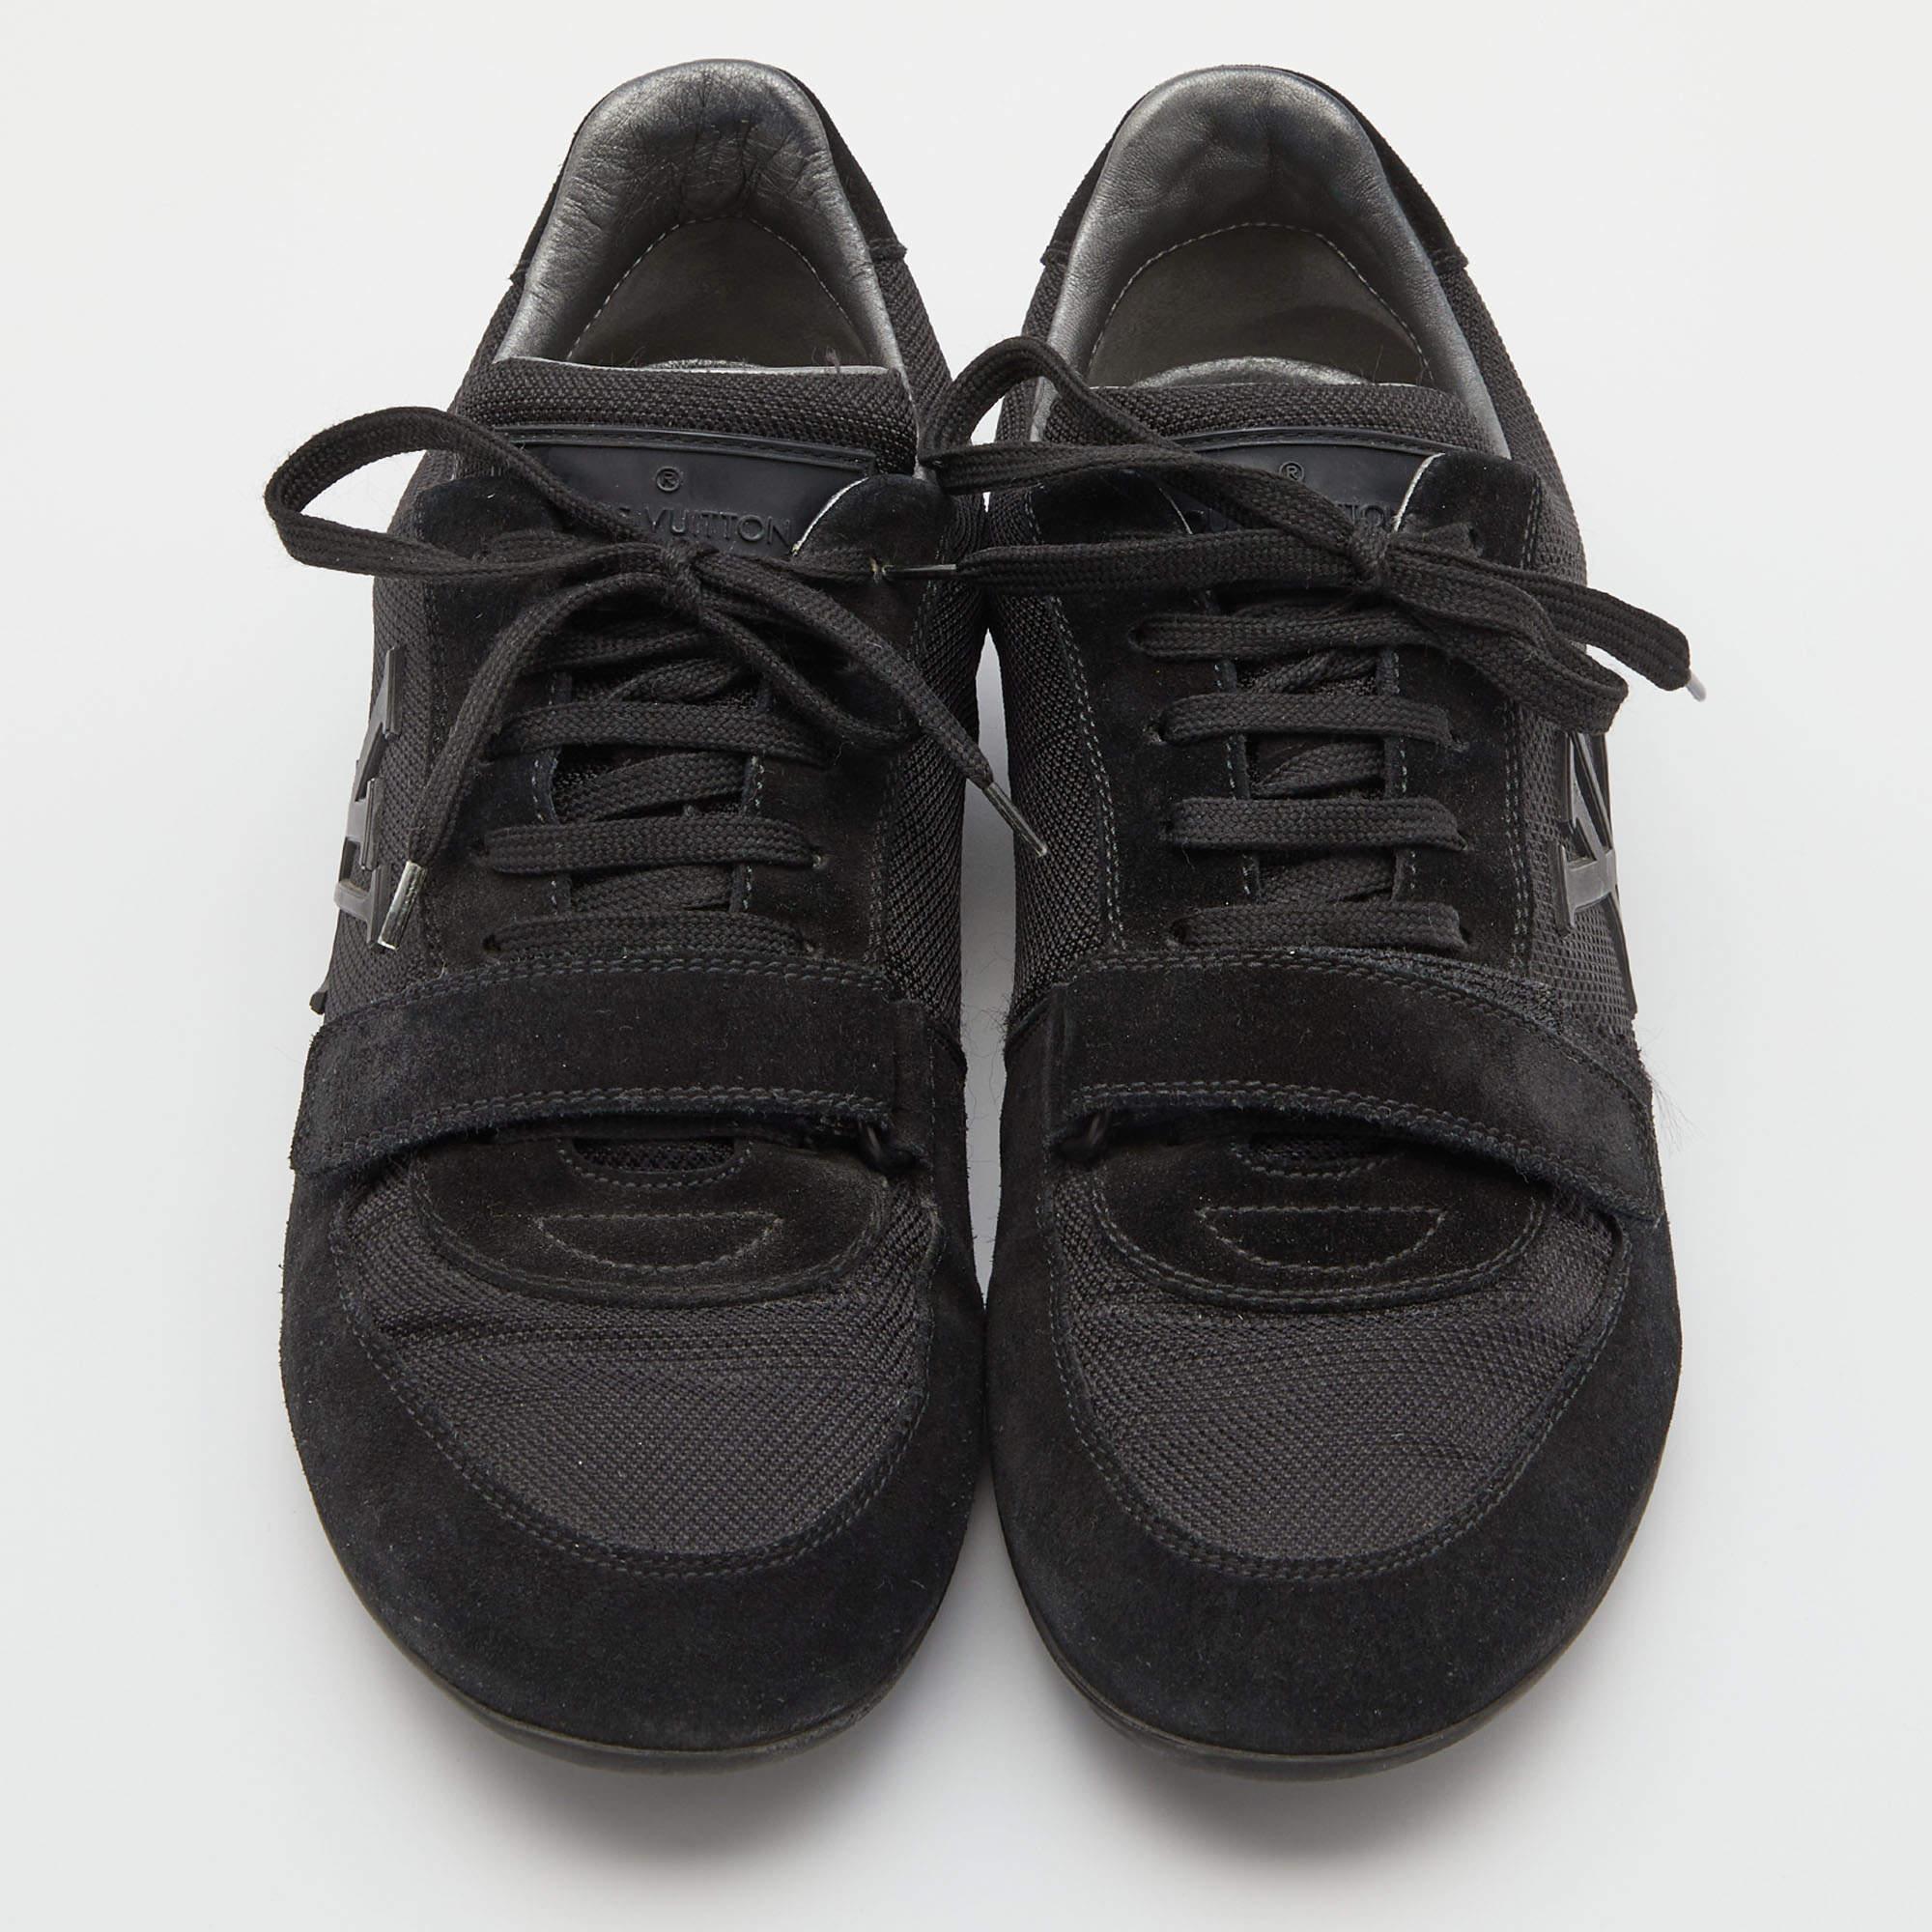 This classy and casual pair of low-top sneakers from Louis Vuitton is a must-have! They are made from suede & mesh and come in a versatile shade of black. It flaunts the logo on the sides, lace-ups on the vamps, and is complete with rubber soles.

